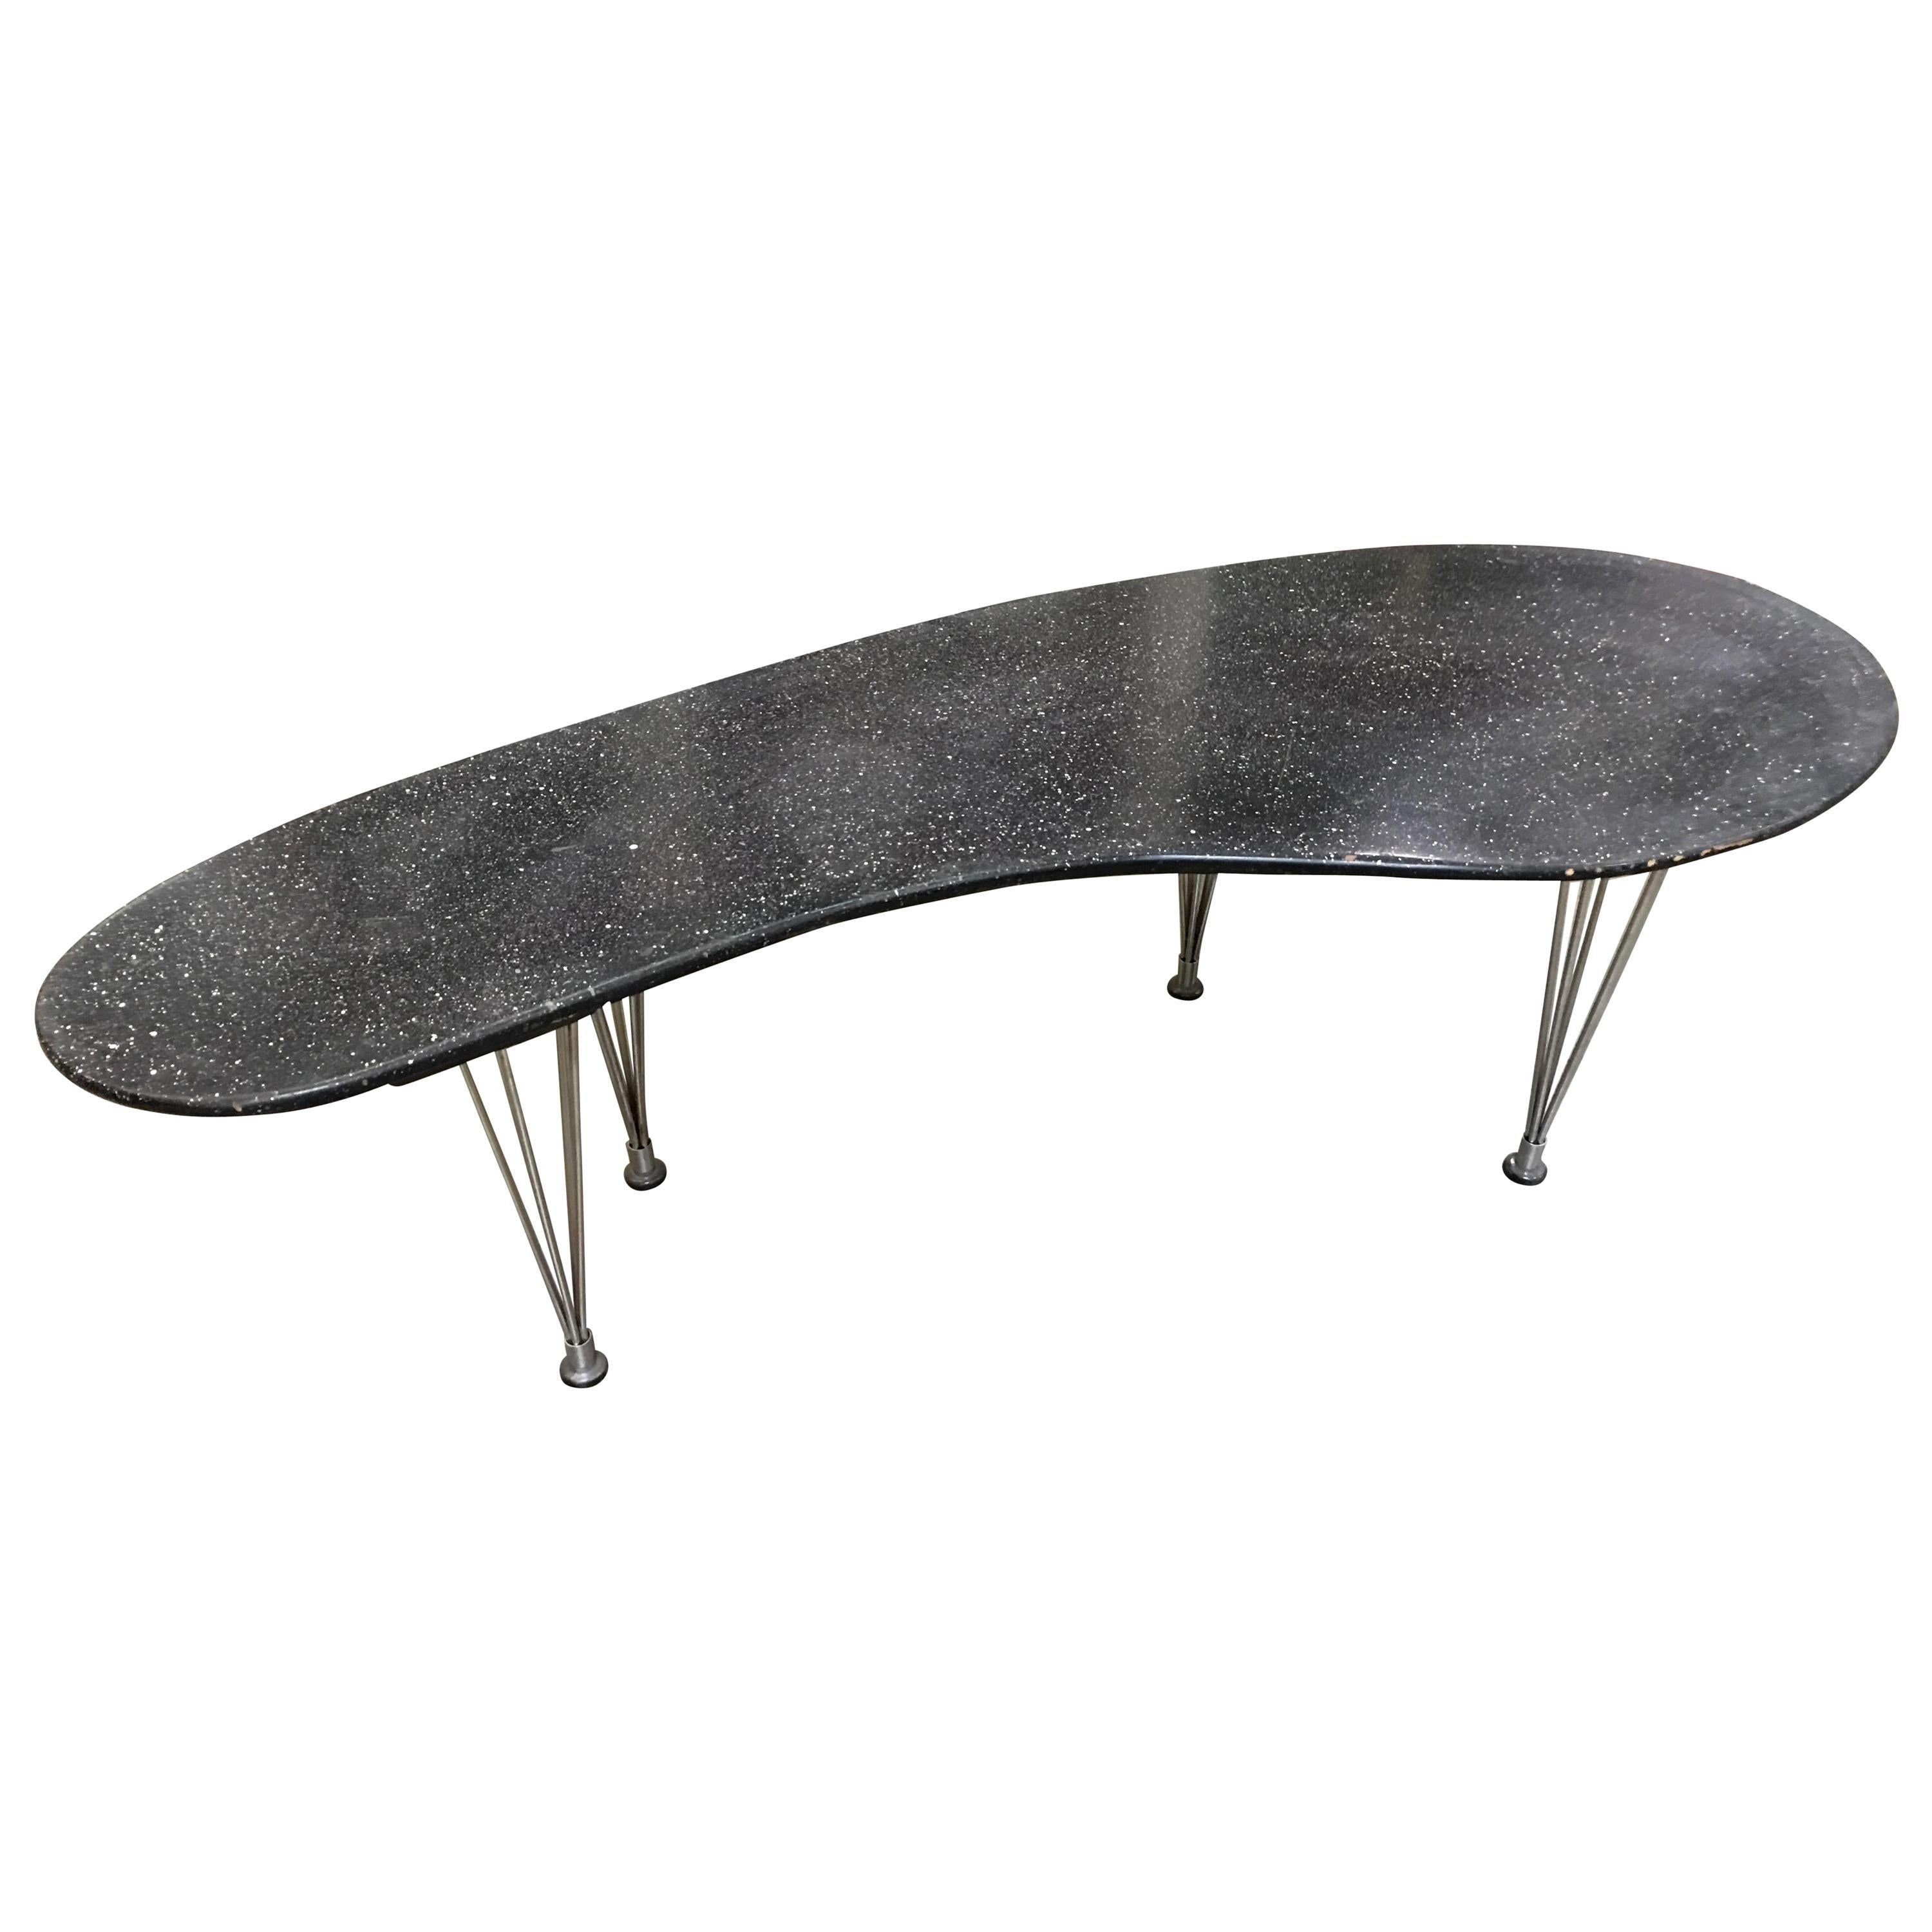 Large 67" Mid-Century Bruno Mathsson Biomorphic Coffee Table w/ Wire Spoke Legs For Sale